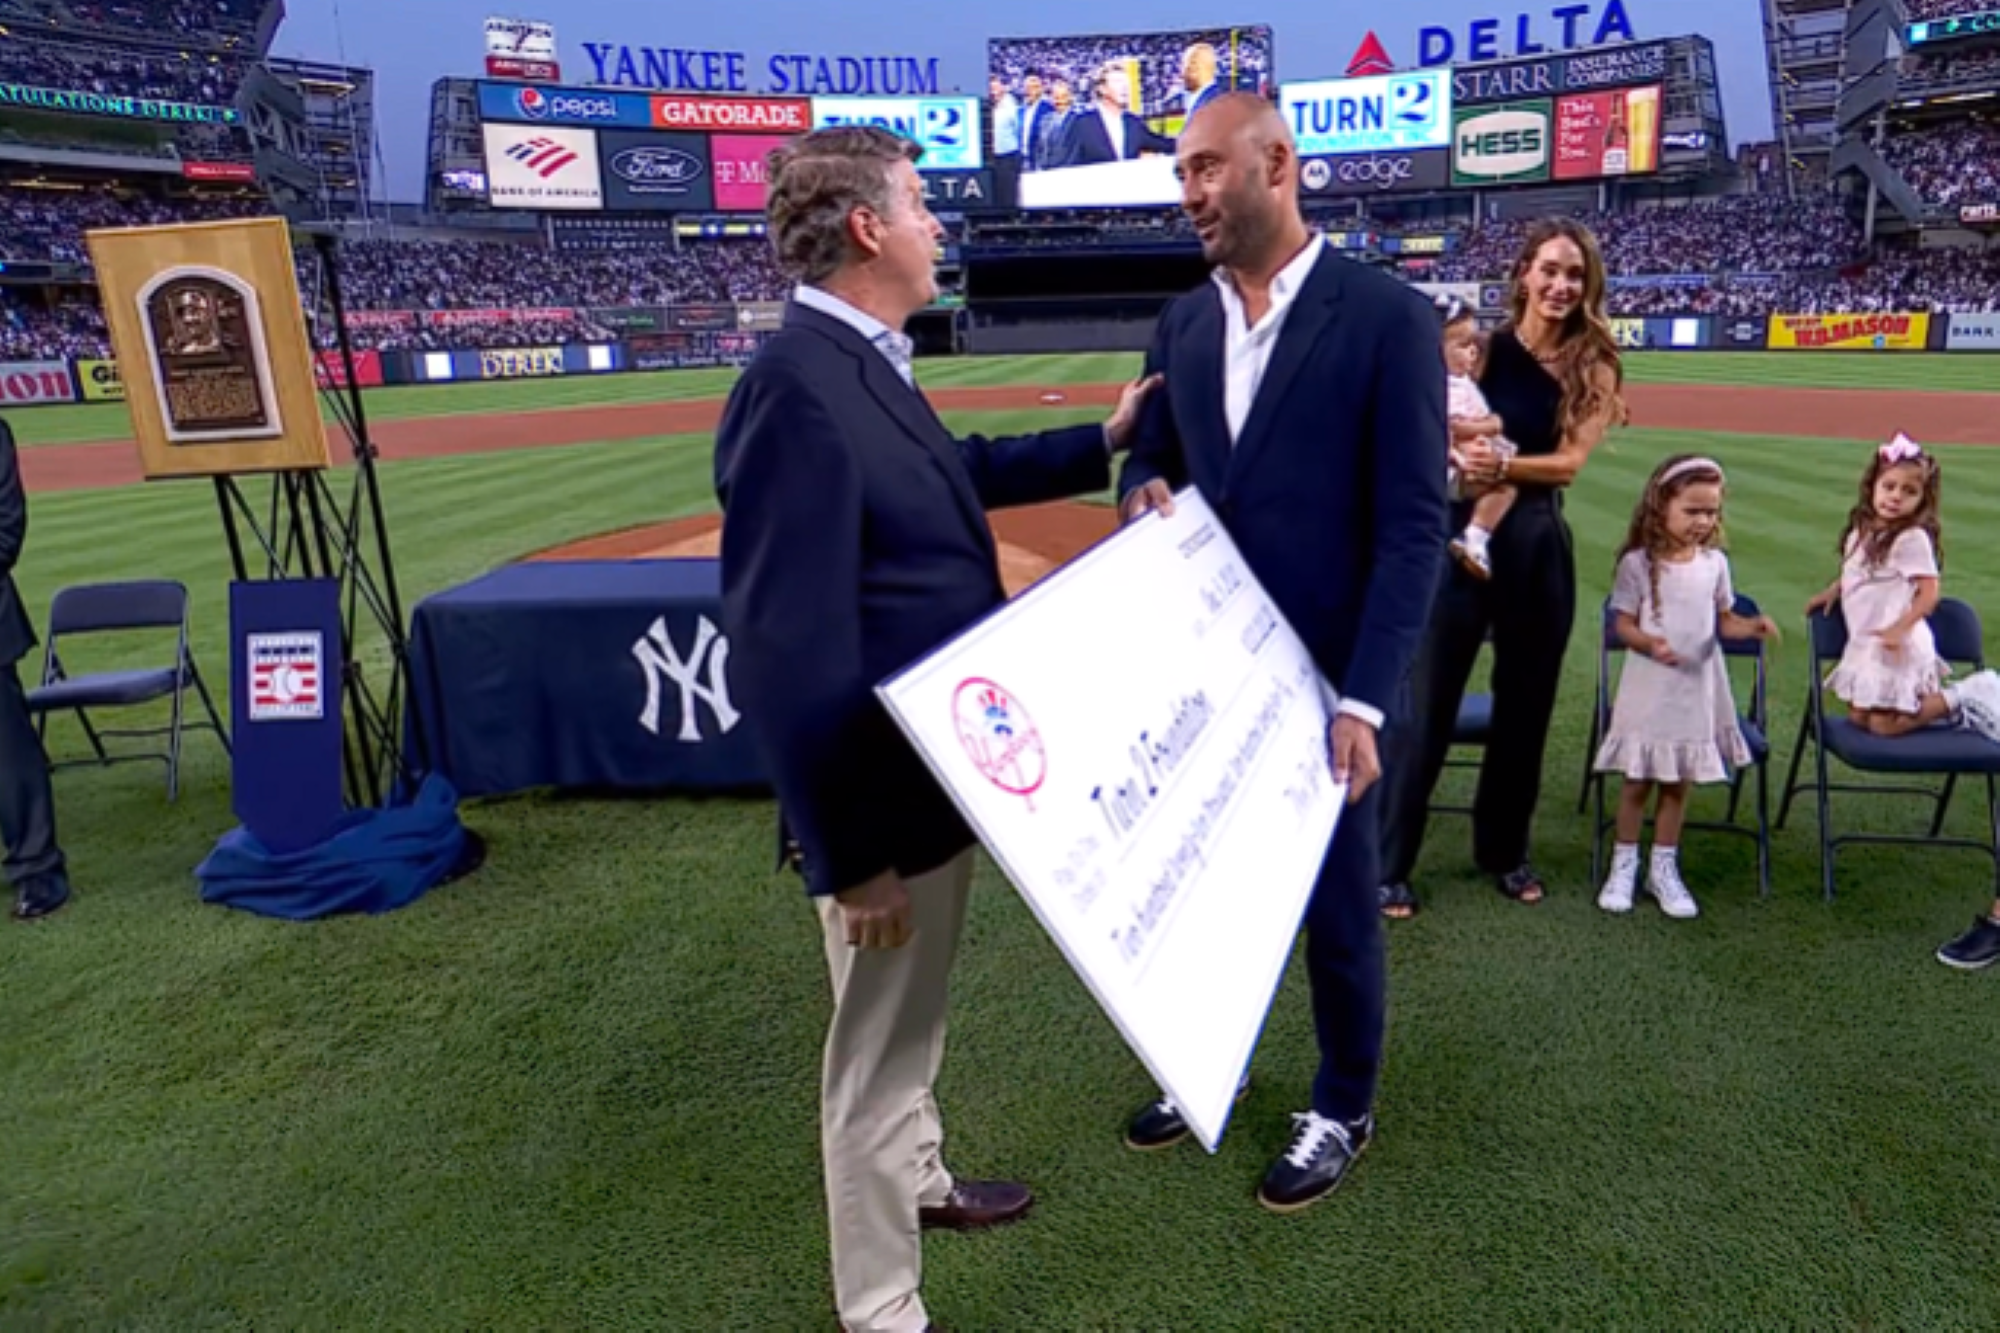 New York Yankees legend Derek Jeter will have to wait for his Hall